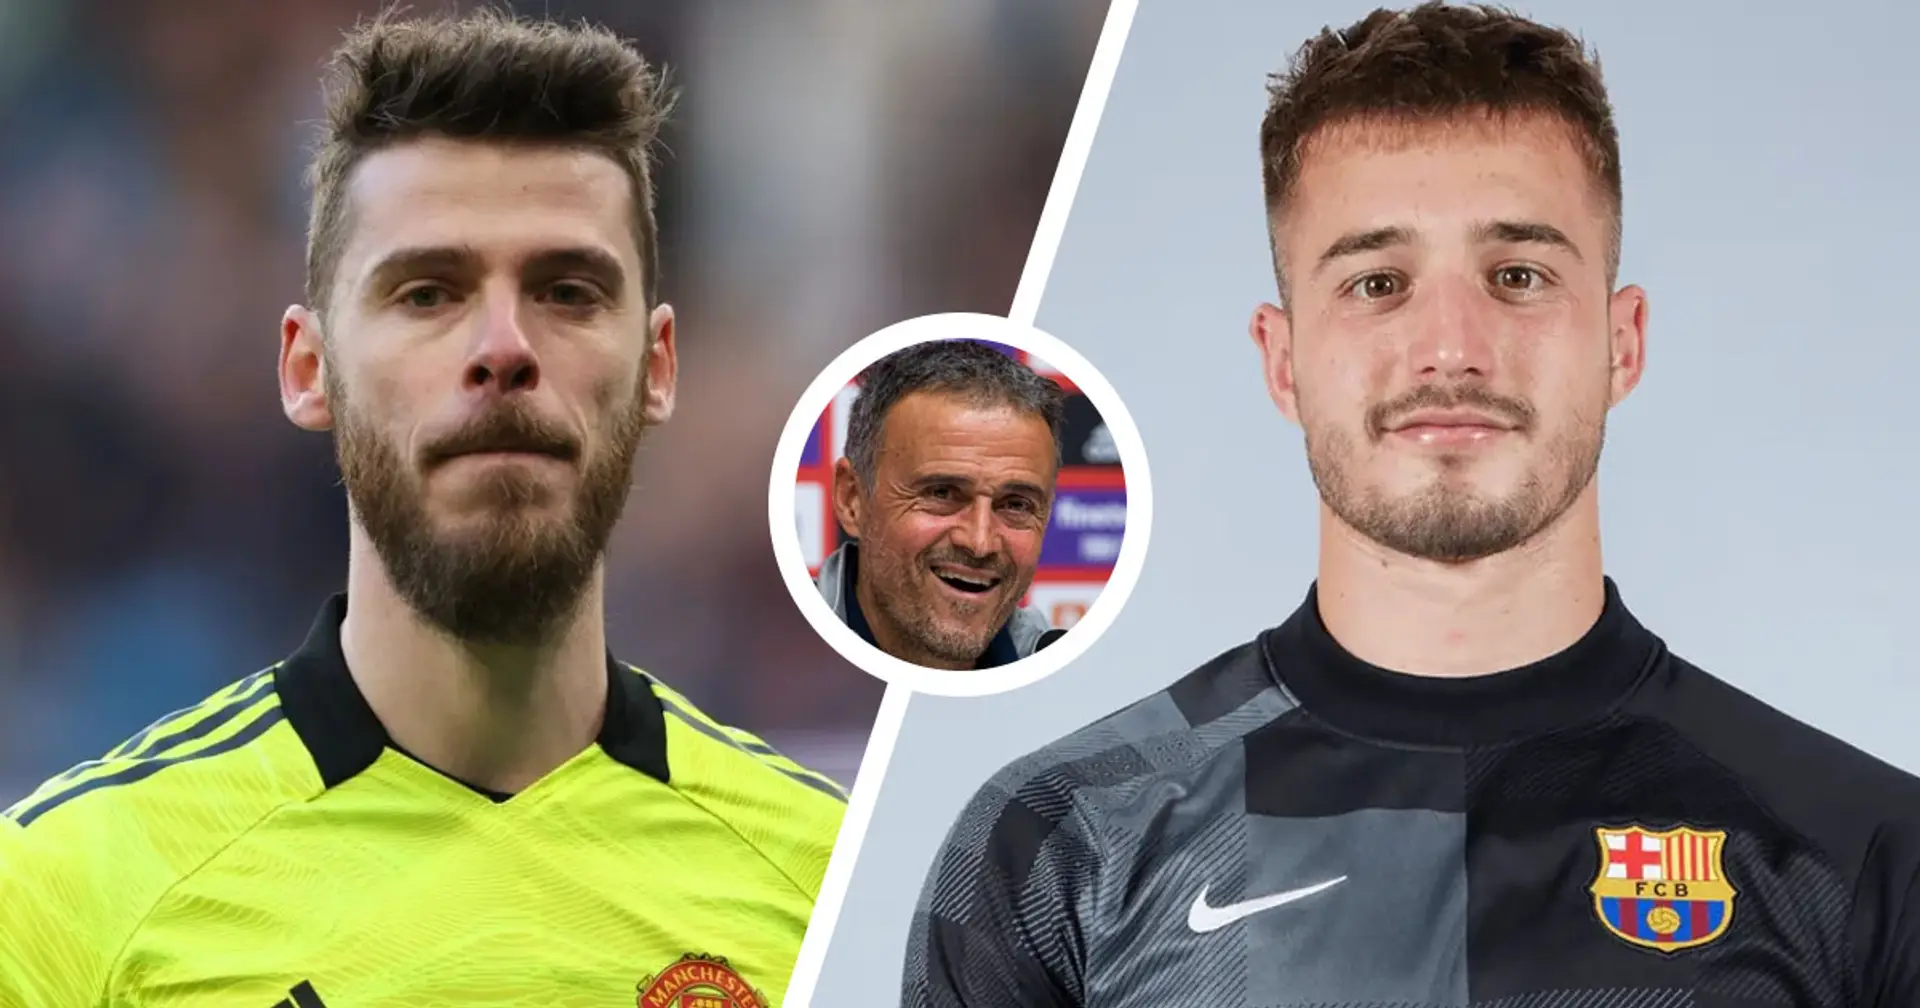 Luis Enrique reveals why he called up Barcelona reserves goalkeeper ahead of De Gea for Spain